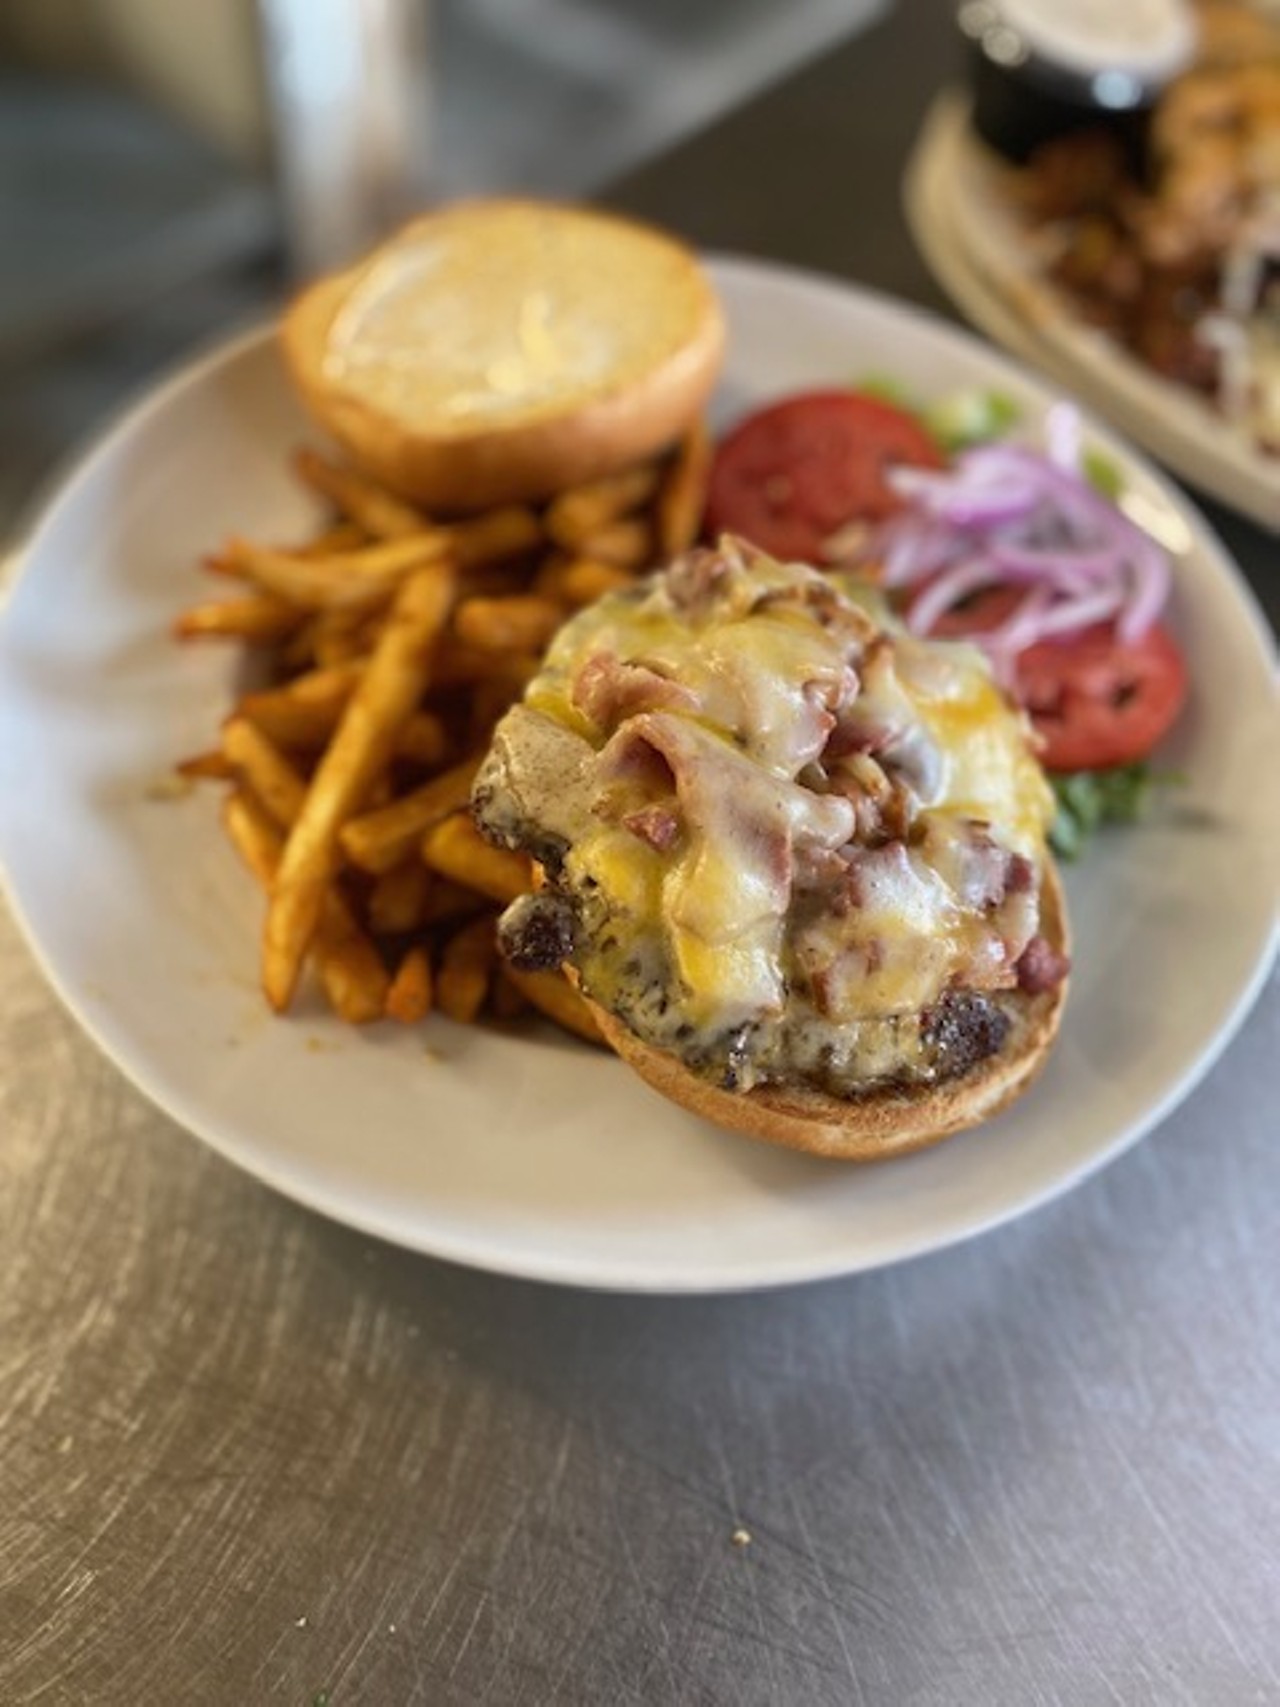 Guillermo’s Austin Street
1216 Austin St
$12 Bacon Cheese Burger100% Angus Beef hand packed daily. Served with our prepared grilled bun with mayo, lettuce, tomato, red onion, & pickles.